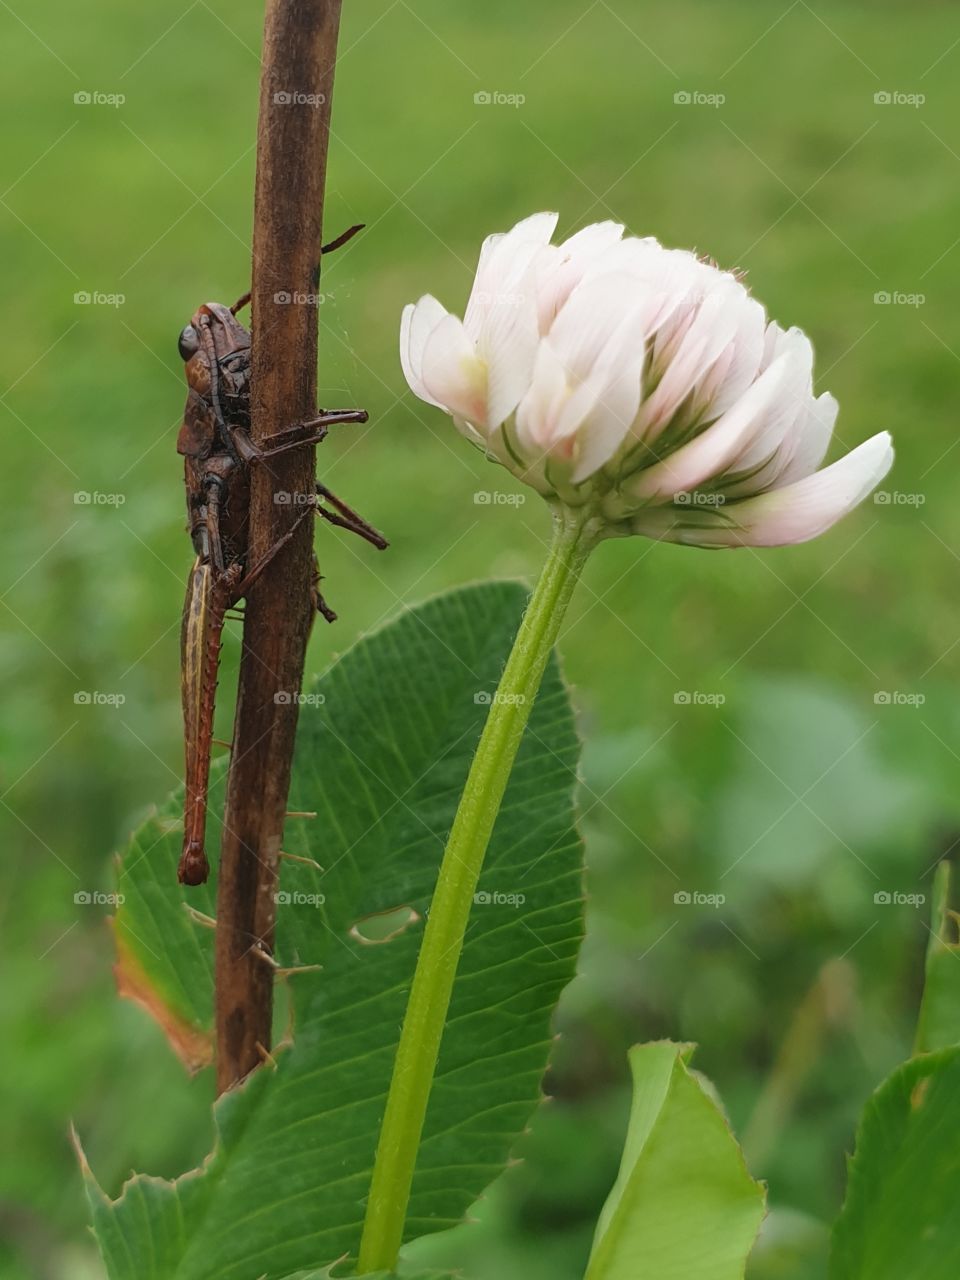 A dead insect holding on to a poppy-stem.